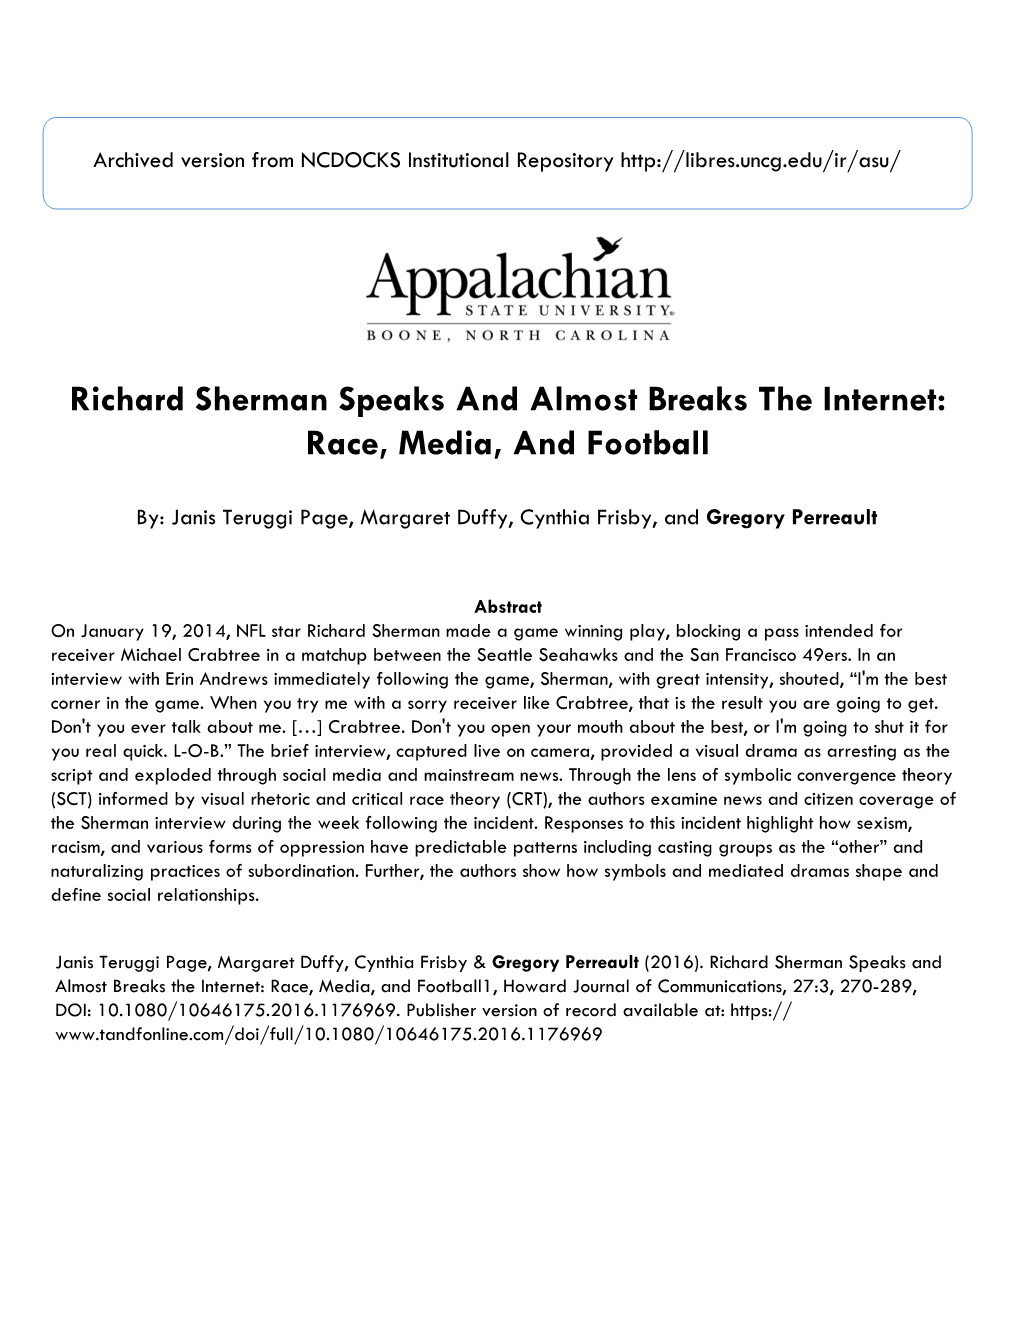 Richard Sherman Speaks and Almost Breaks the Internet: Race, Media, and Football